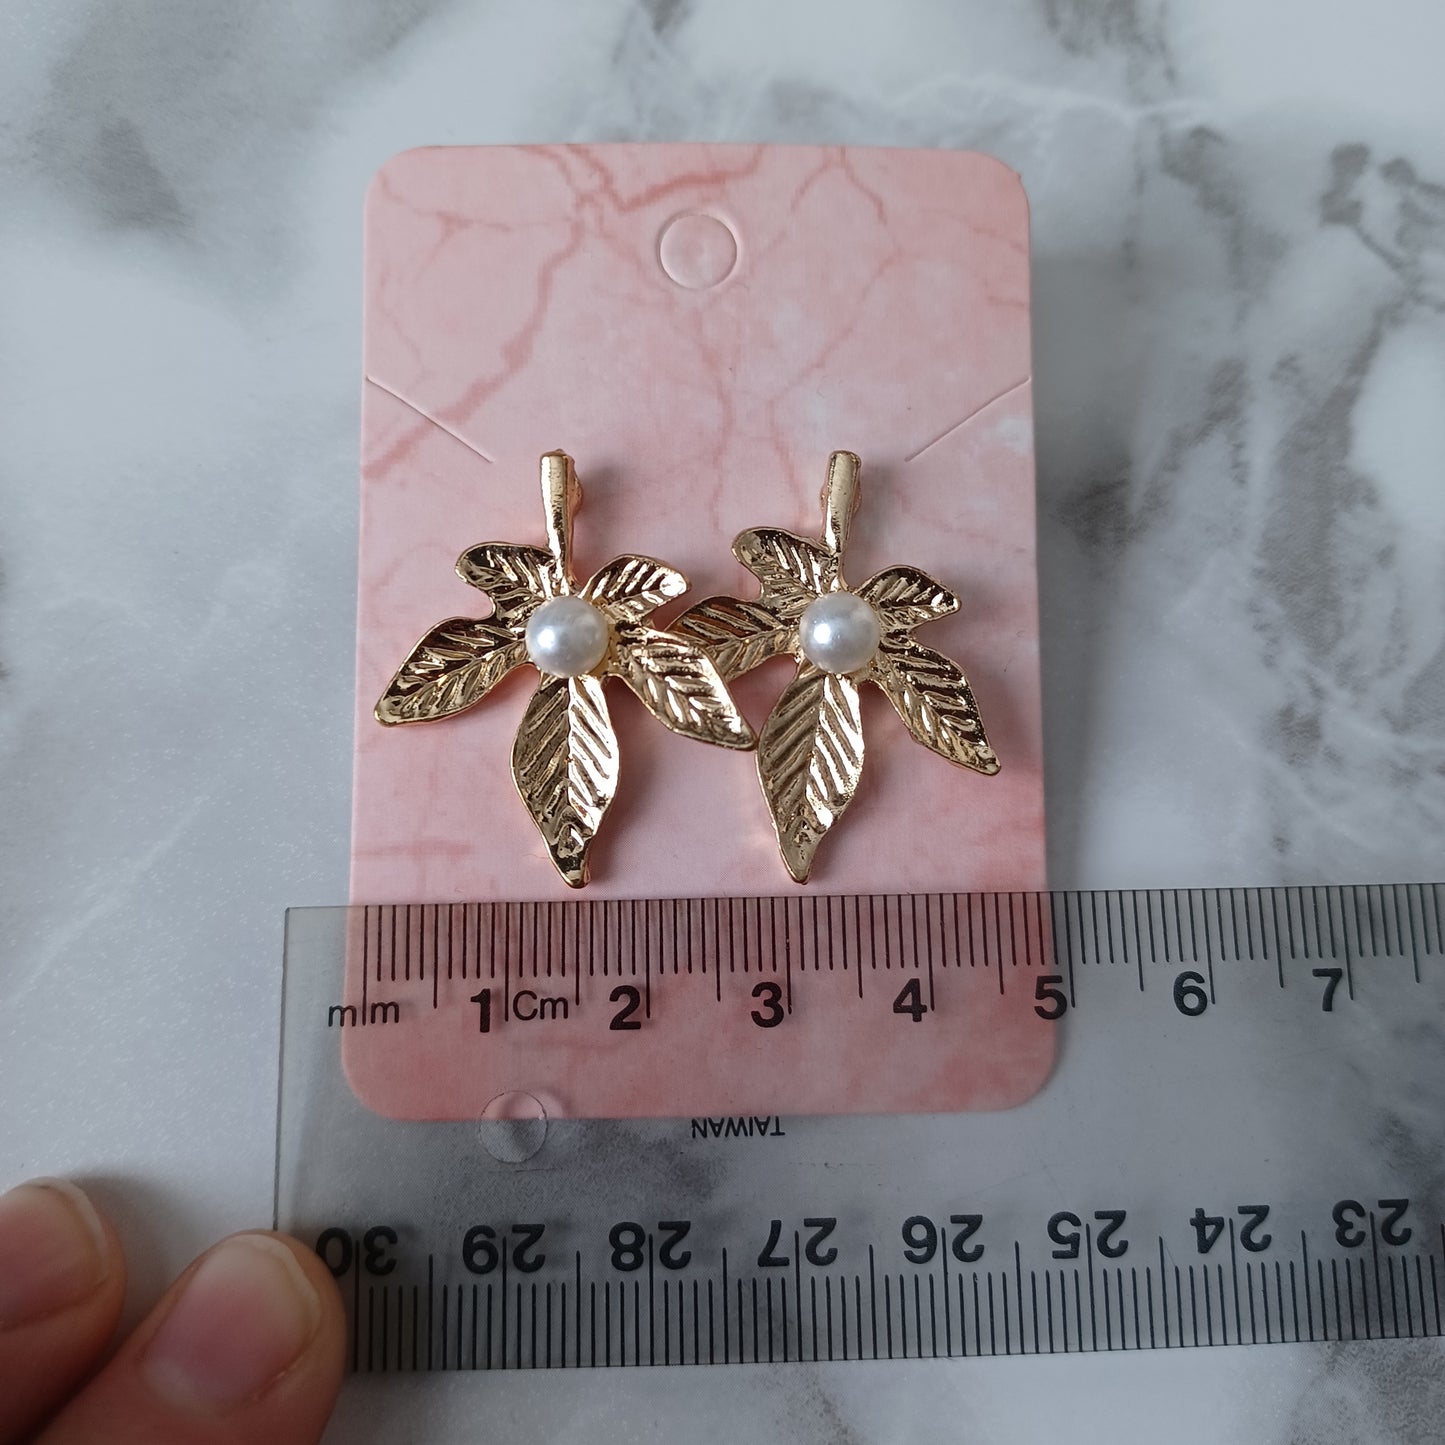 Boucles d'oreilles feuille d'or et perle/Earrings gold leaf and pearl